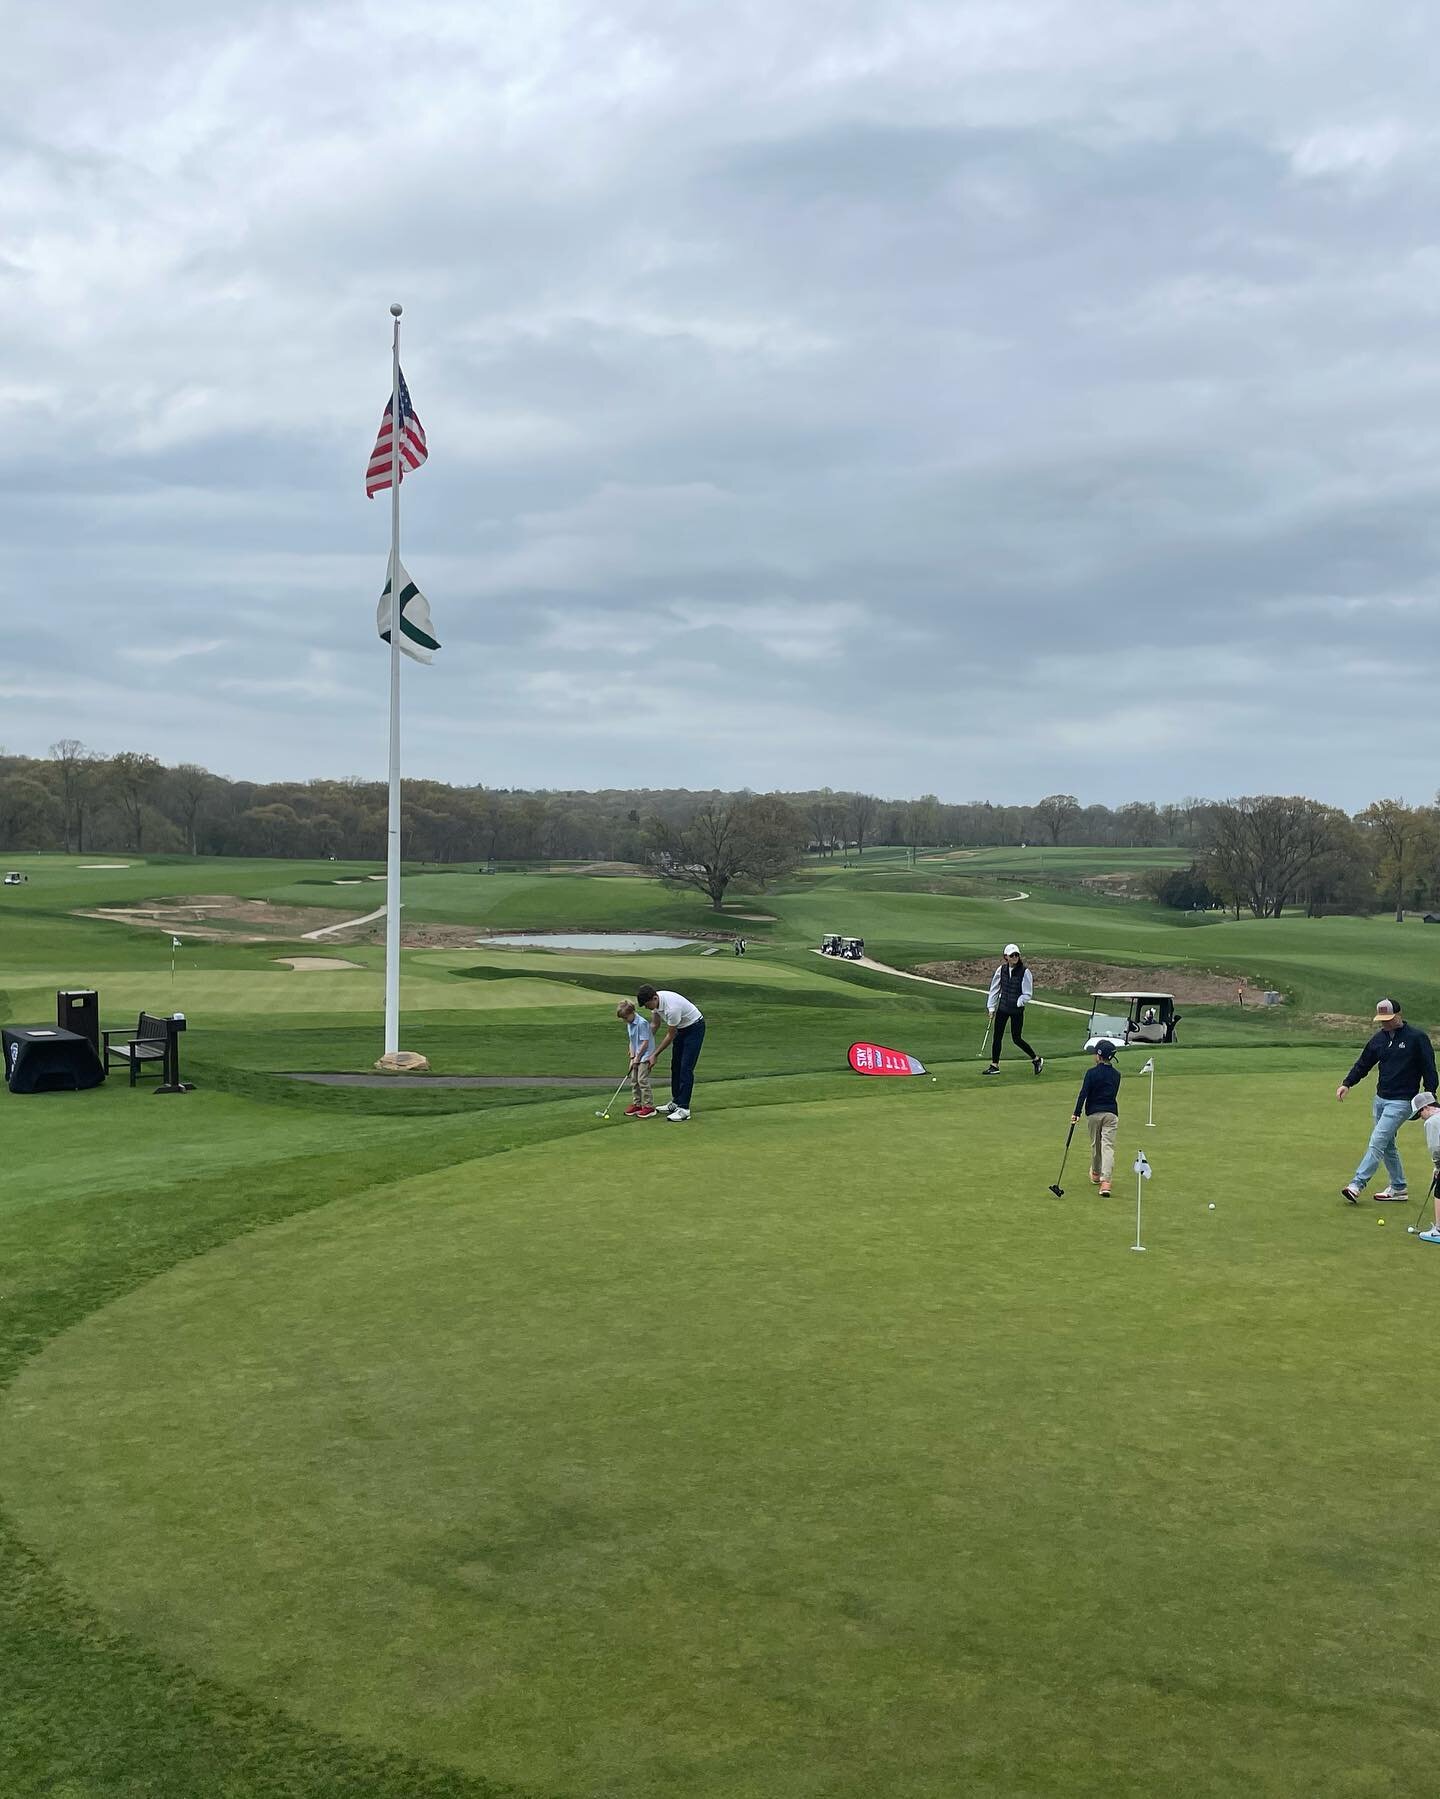 Thank you @stgeorgesgolf for hosting our third U.S. Kids golf tournament this past weekend. 

We had 6 academy travel team players finish in the top 5 with two players winning their divisions. 
@cjc1562 - 9u Champion.
@jacobandersegolf 16-18 Champion